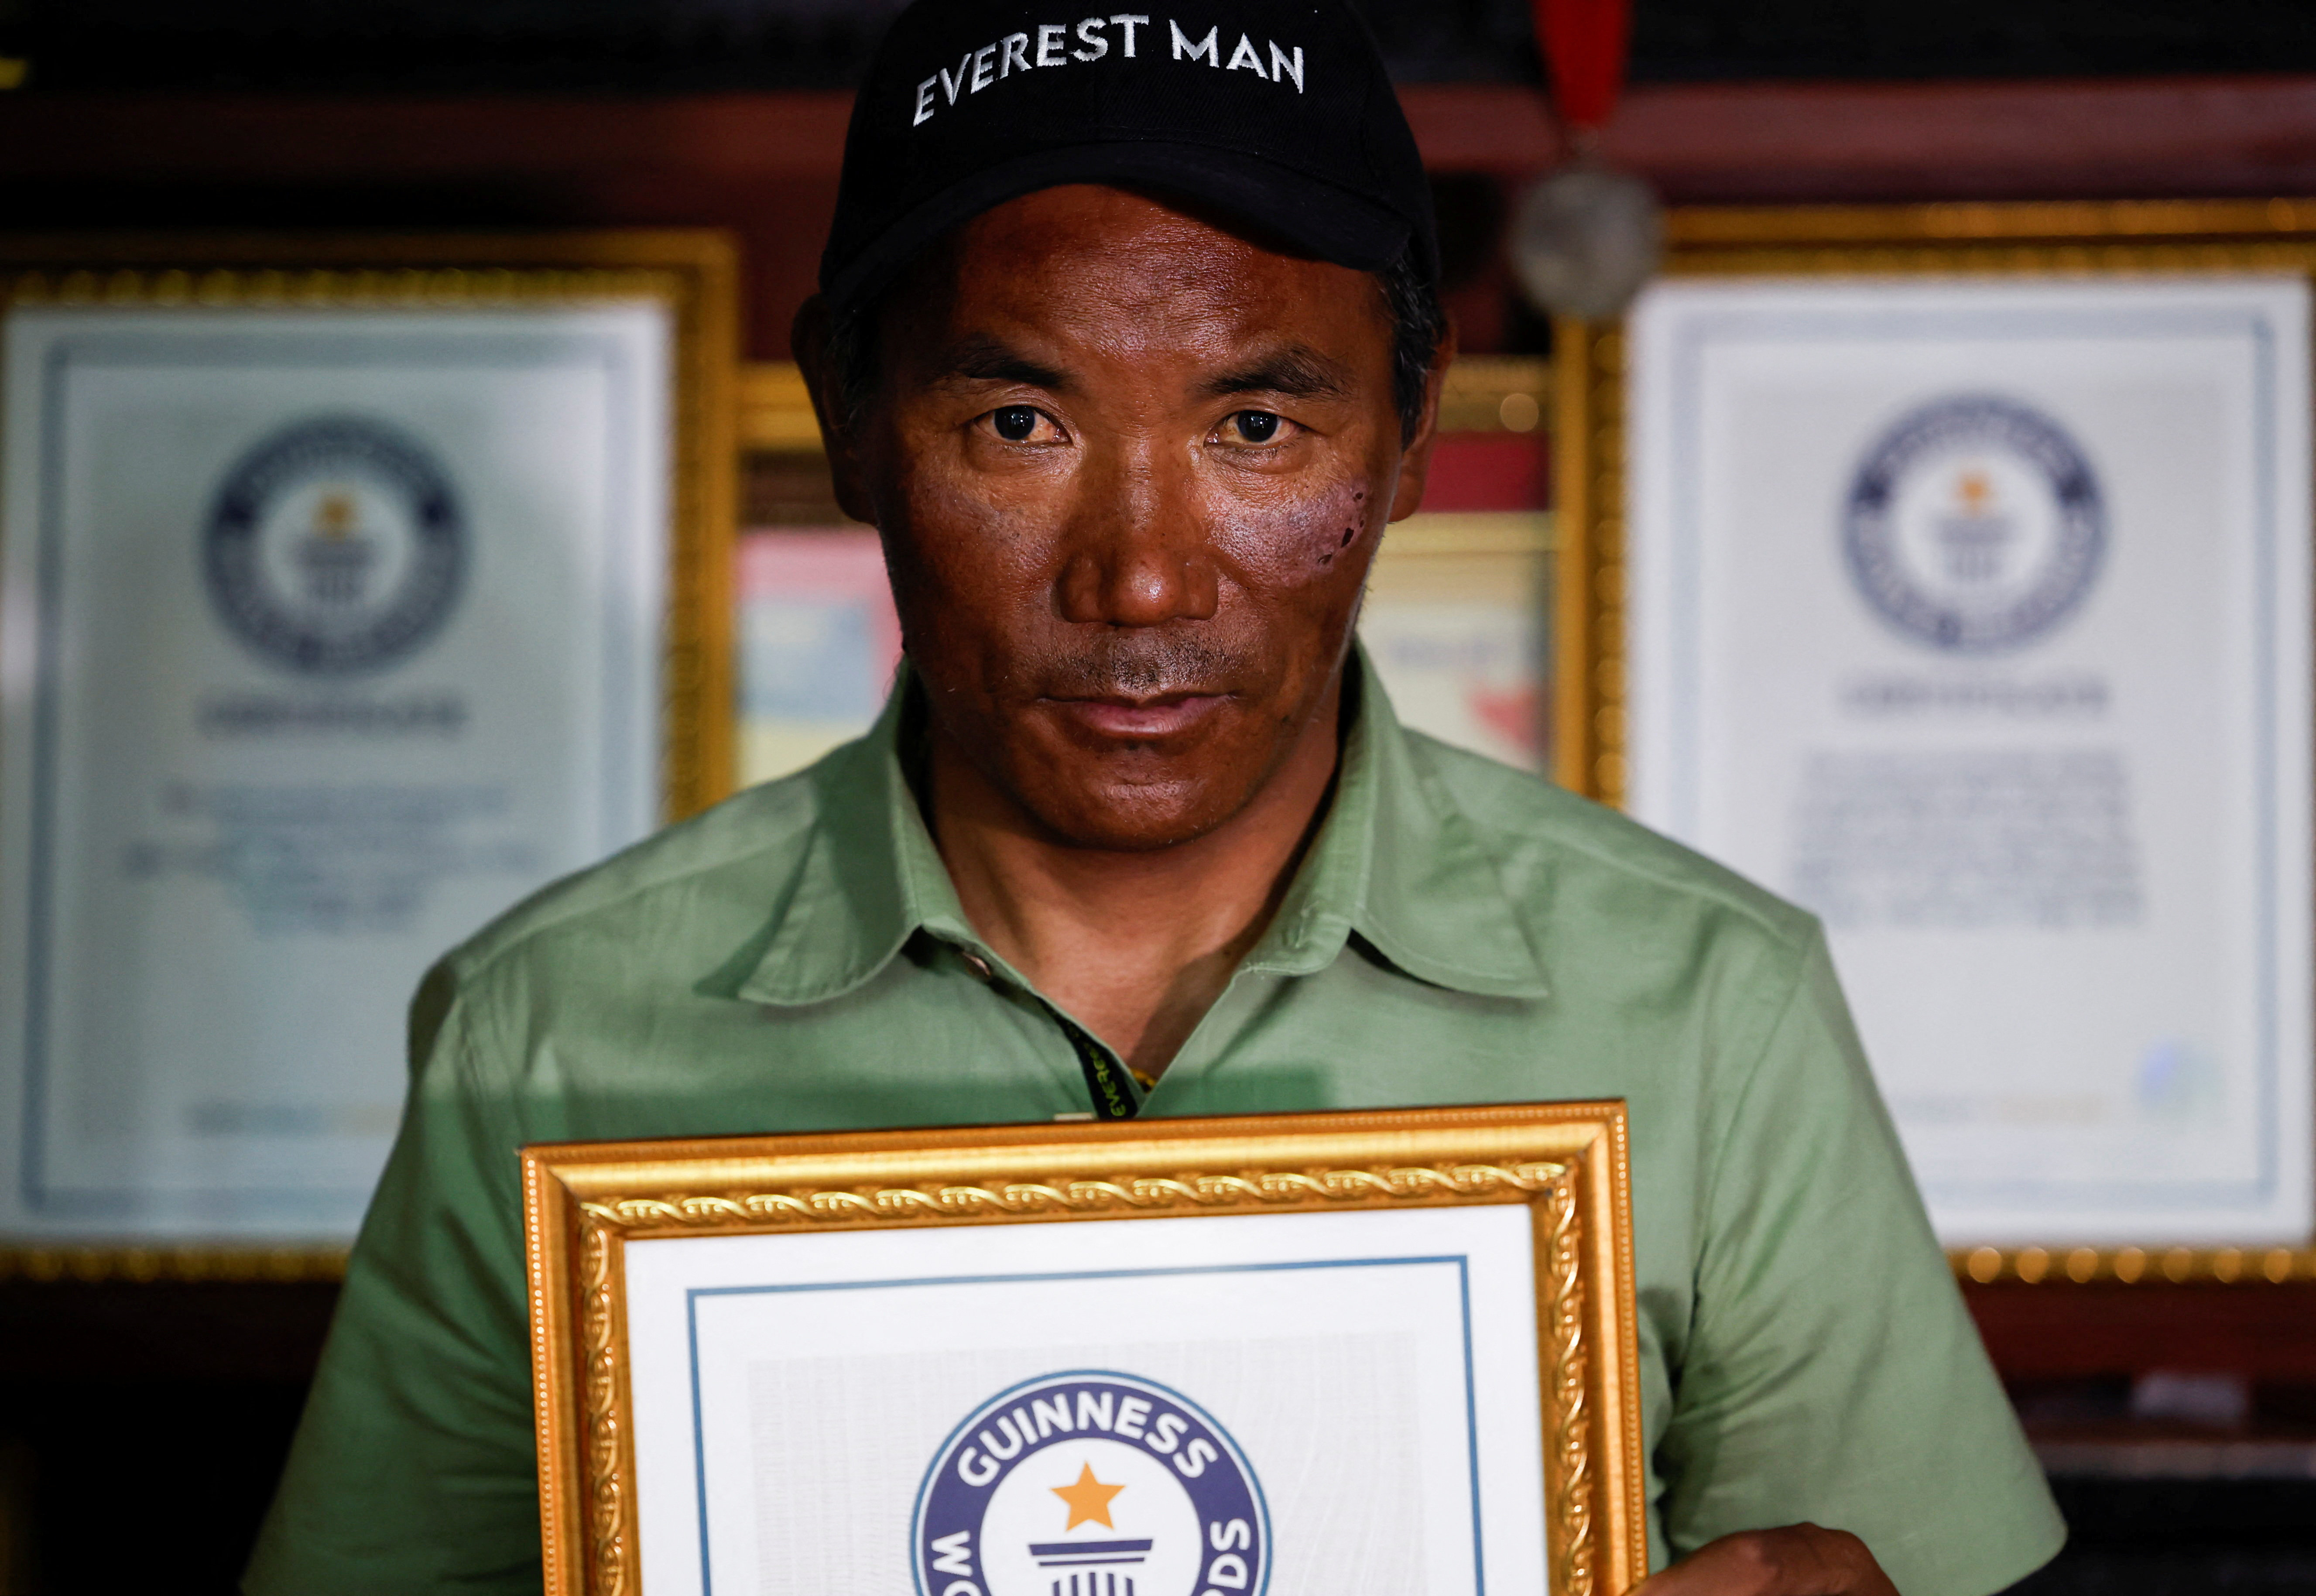 Interview with Nepal's record-holding Everest climber Kami Rita Sherpa